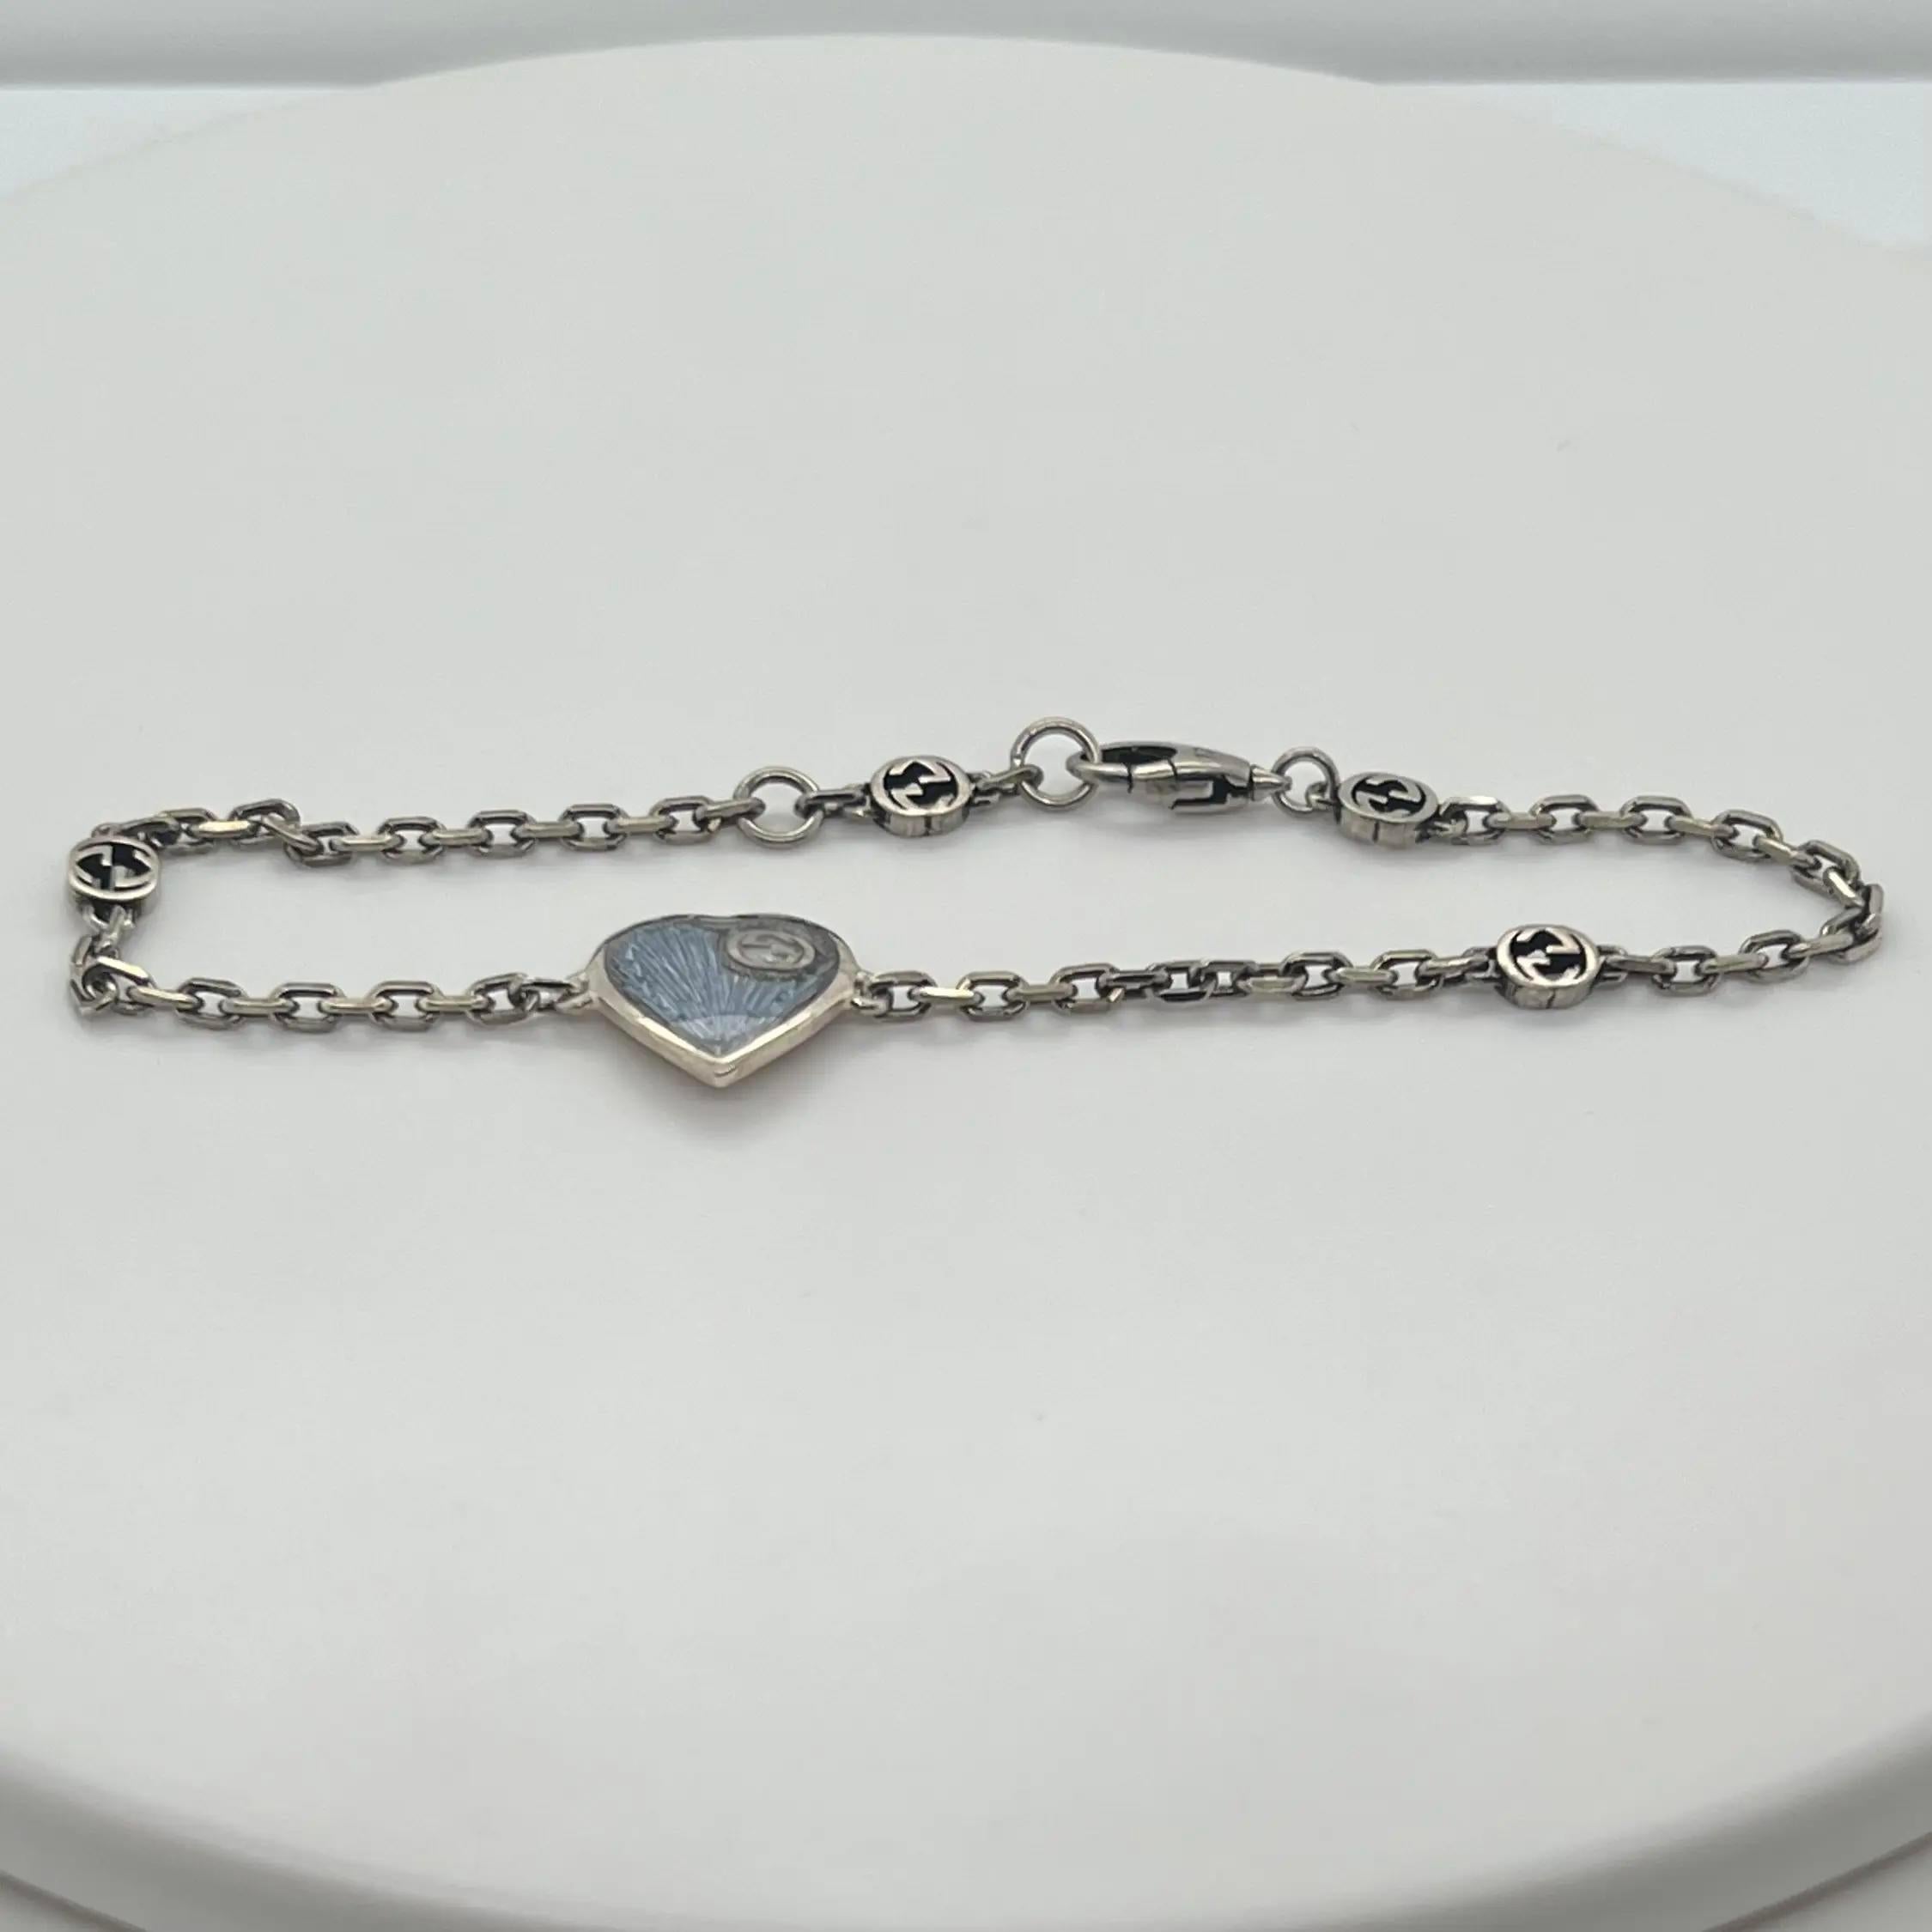 This trendy GUCCI bracelet is designed in 925 sterling silver. It features an intricately engraved light blue heart pendant with an interlocking G symbol attached to a woven link chain. Giving the classic motif a bright and playful twist is light